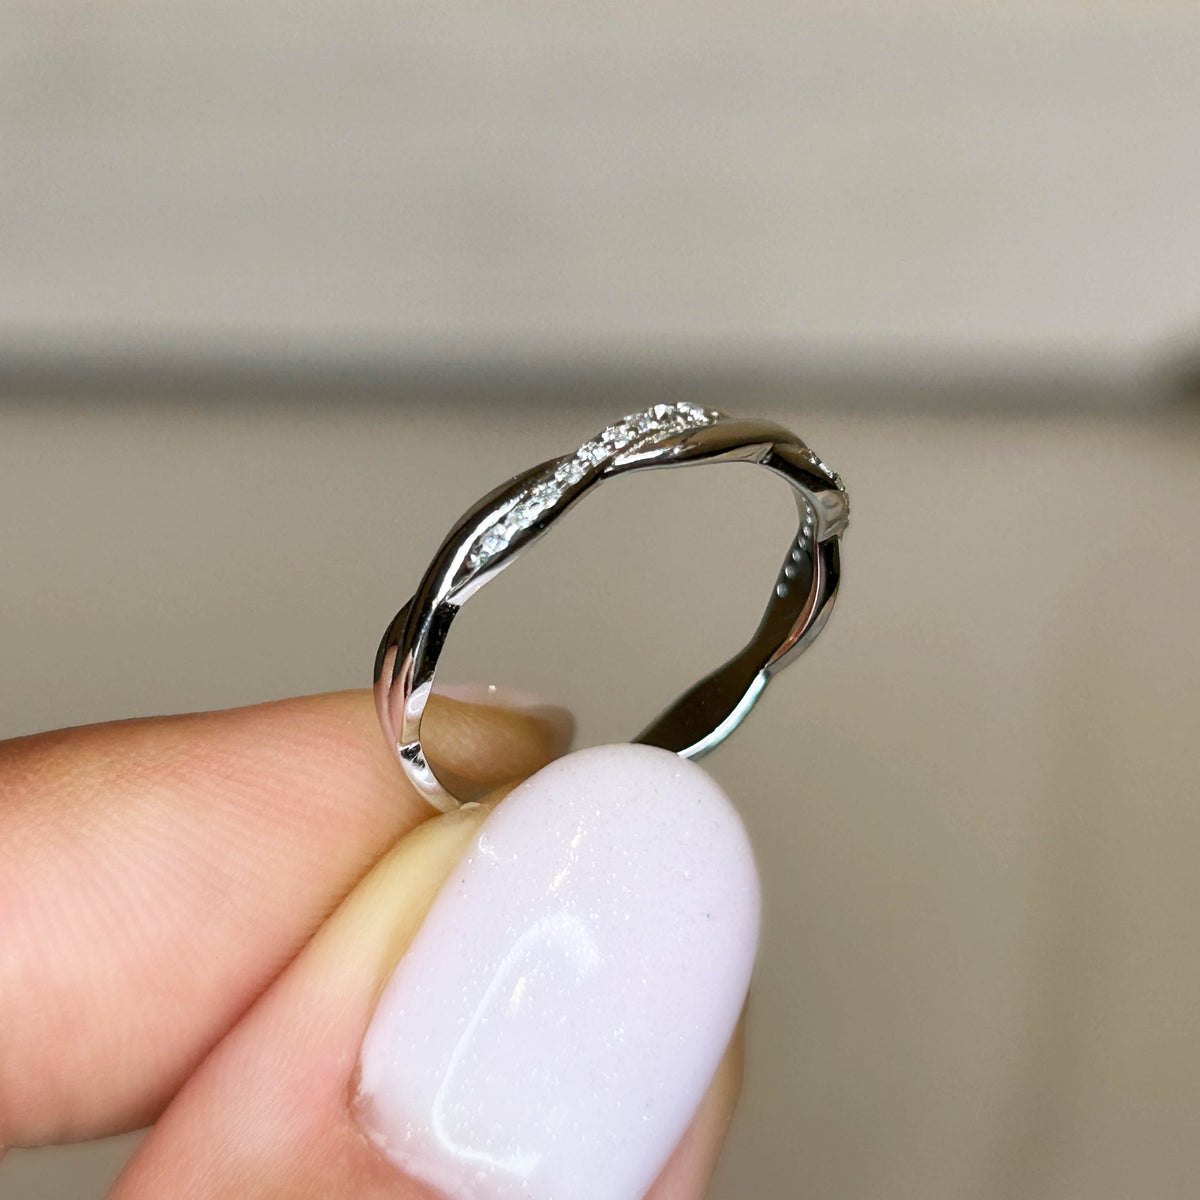 Wavy Silver Ring Size 8